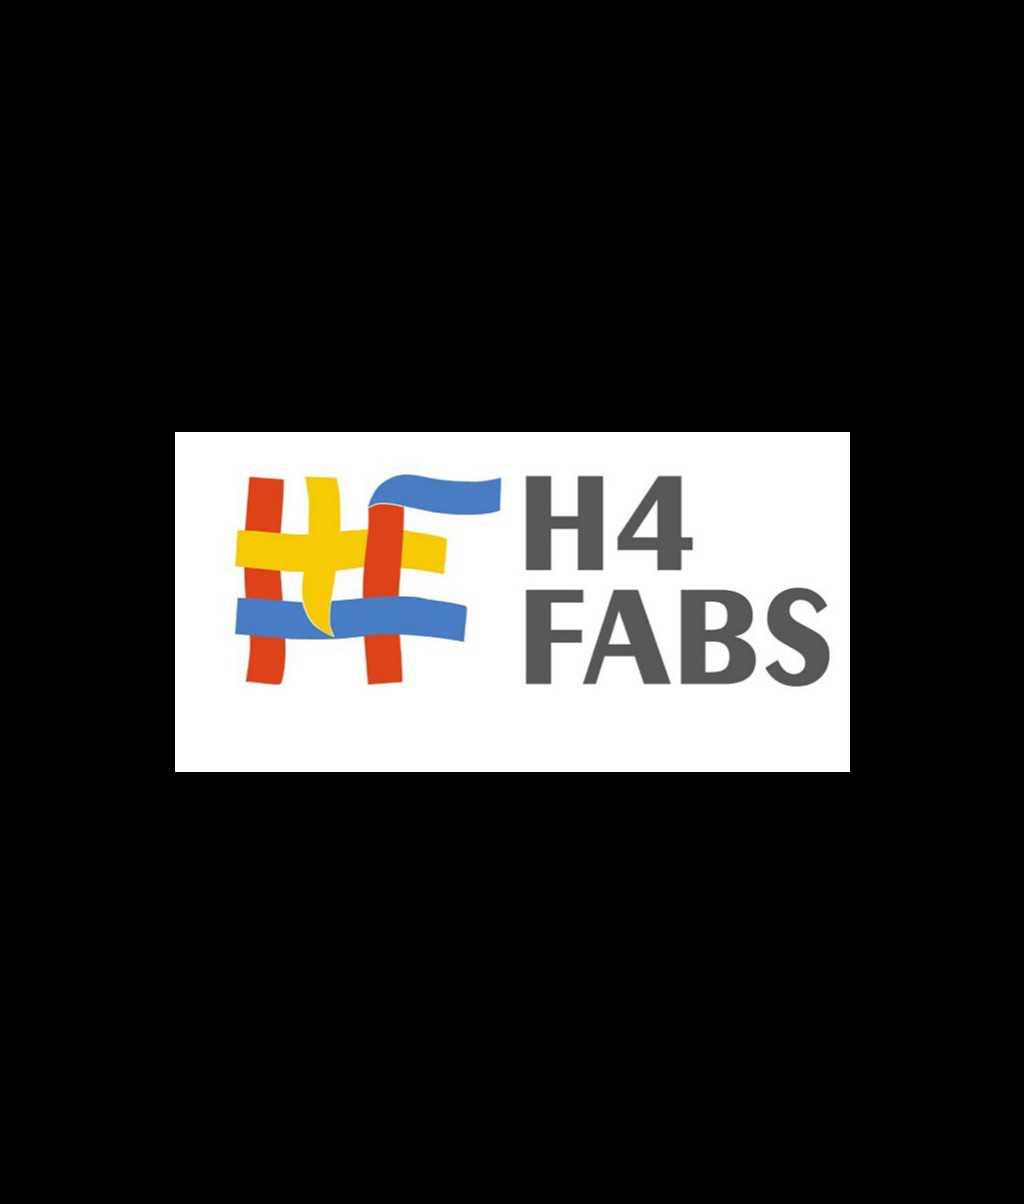 H4 FABS